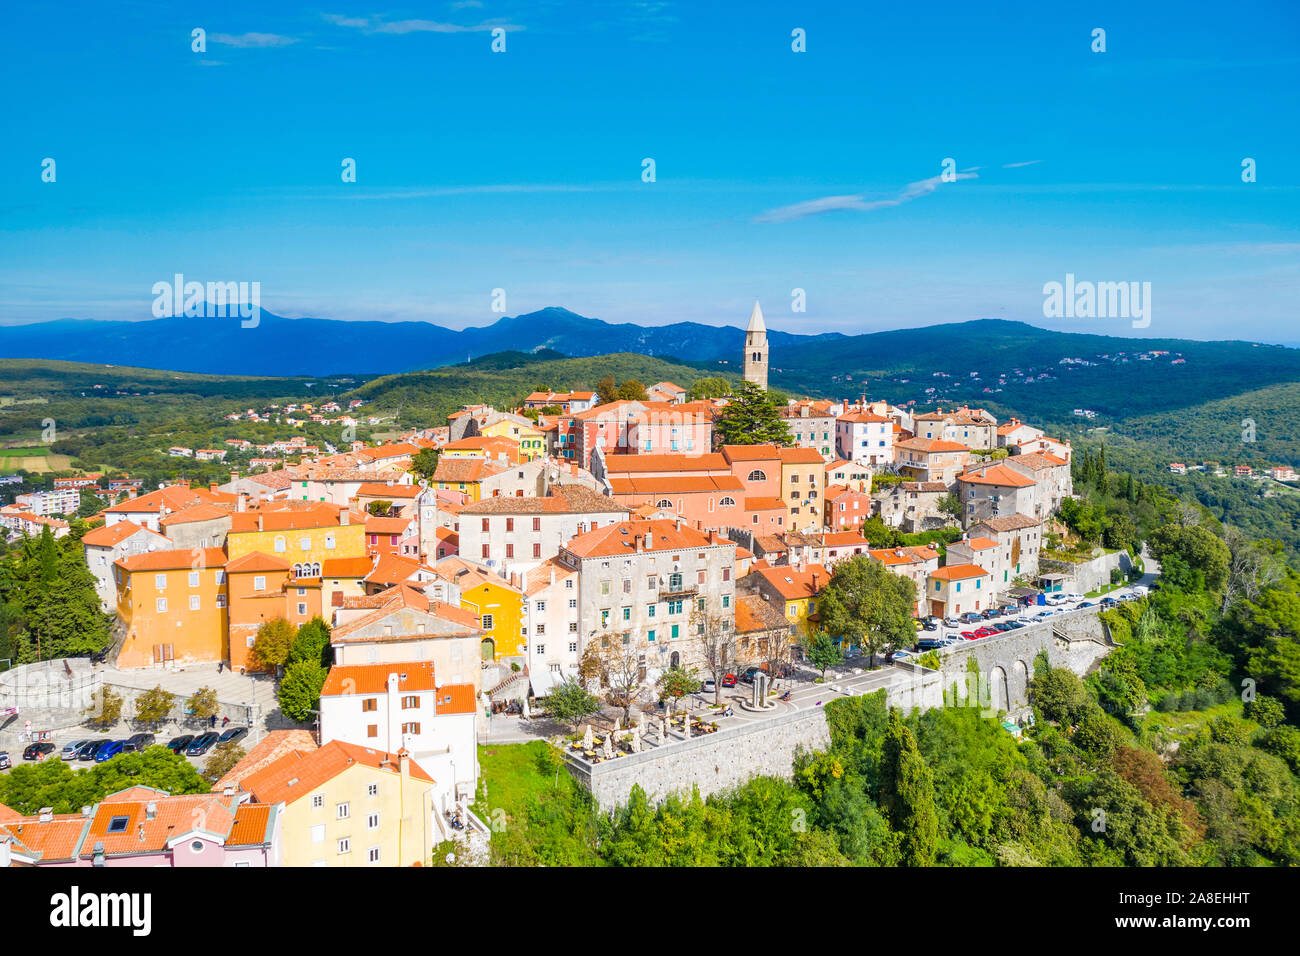 Town of Labin in Istria, Croatia, old traditional houses and castle, view from drone Stock Photo